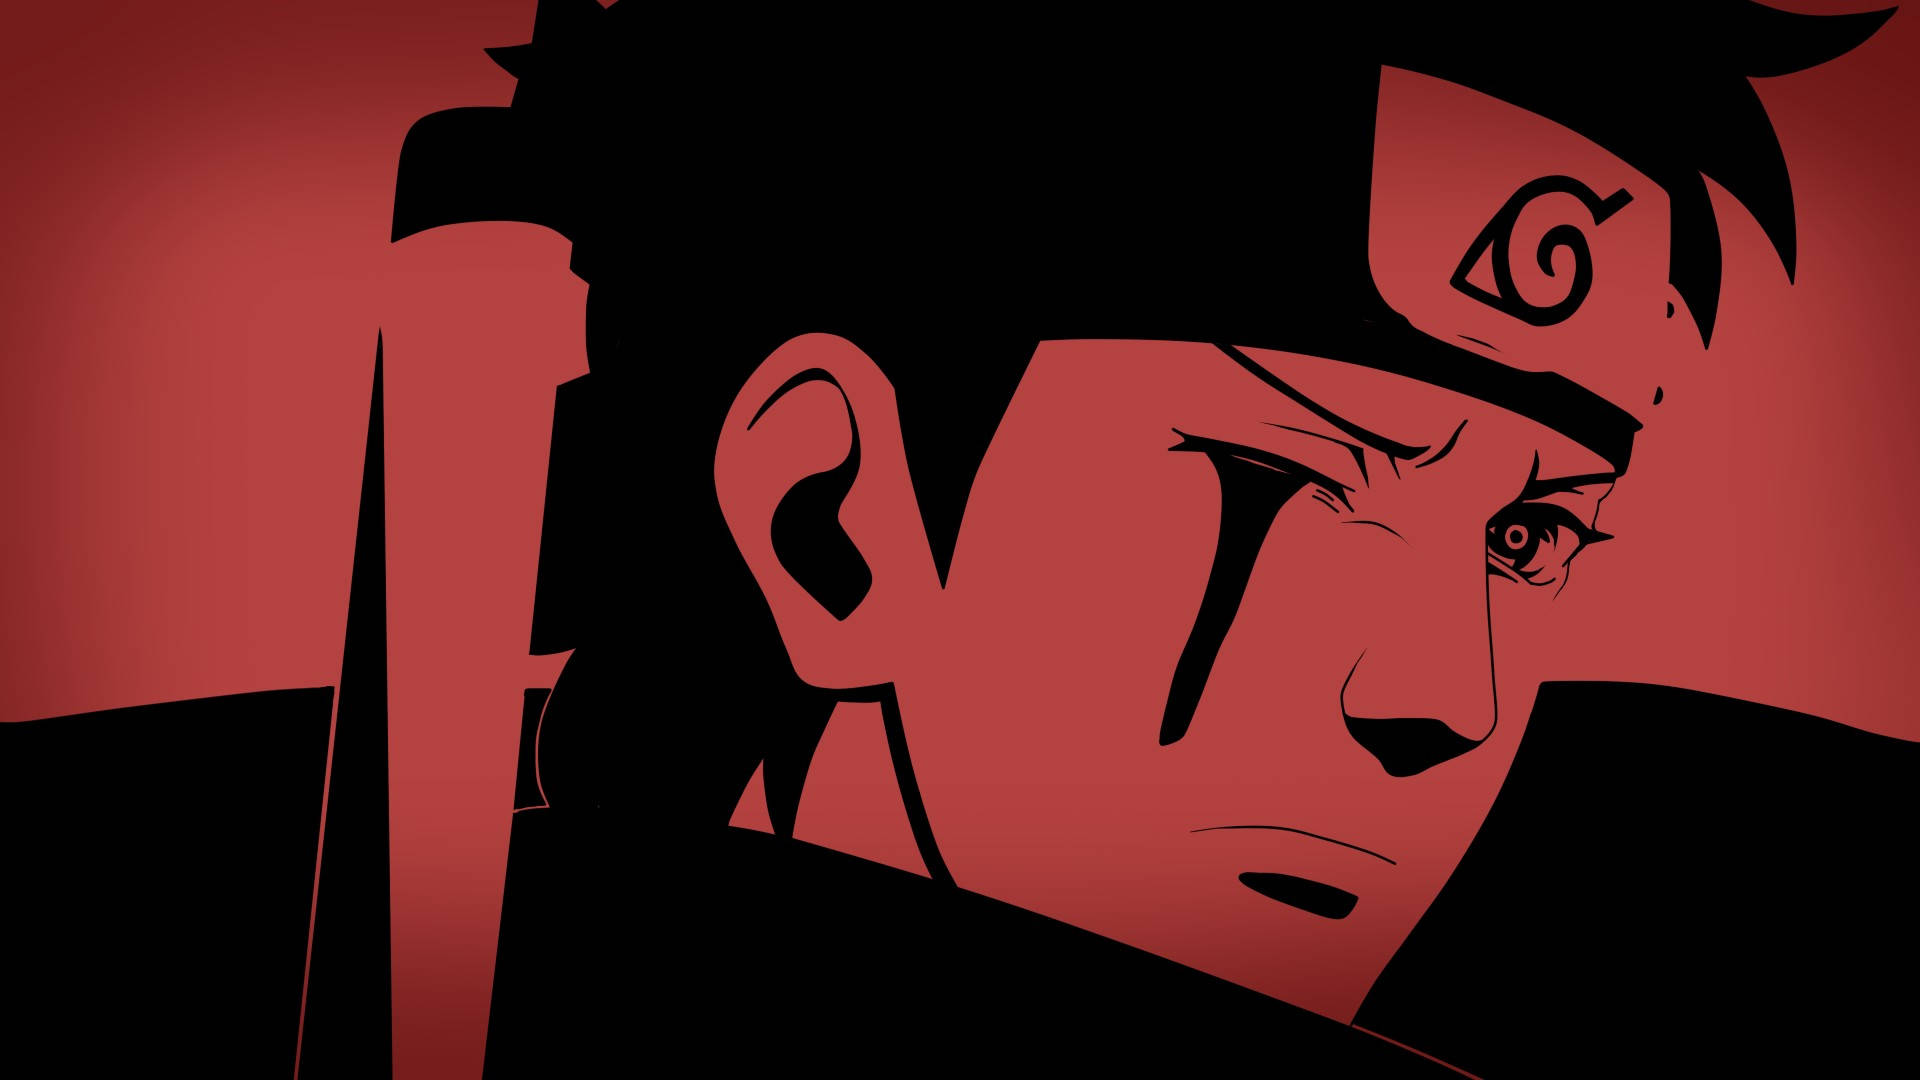 Majestic Illustration Of Shisui In Vibrant Red And Black Background